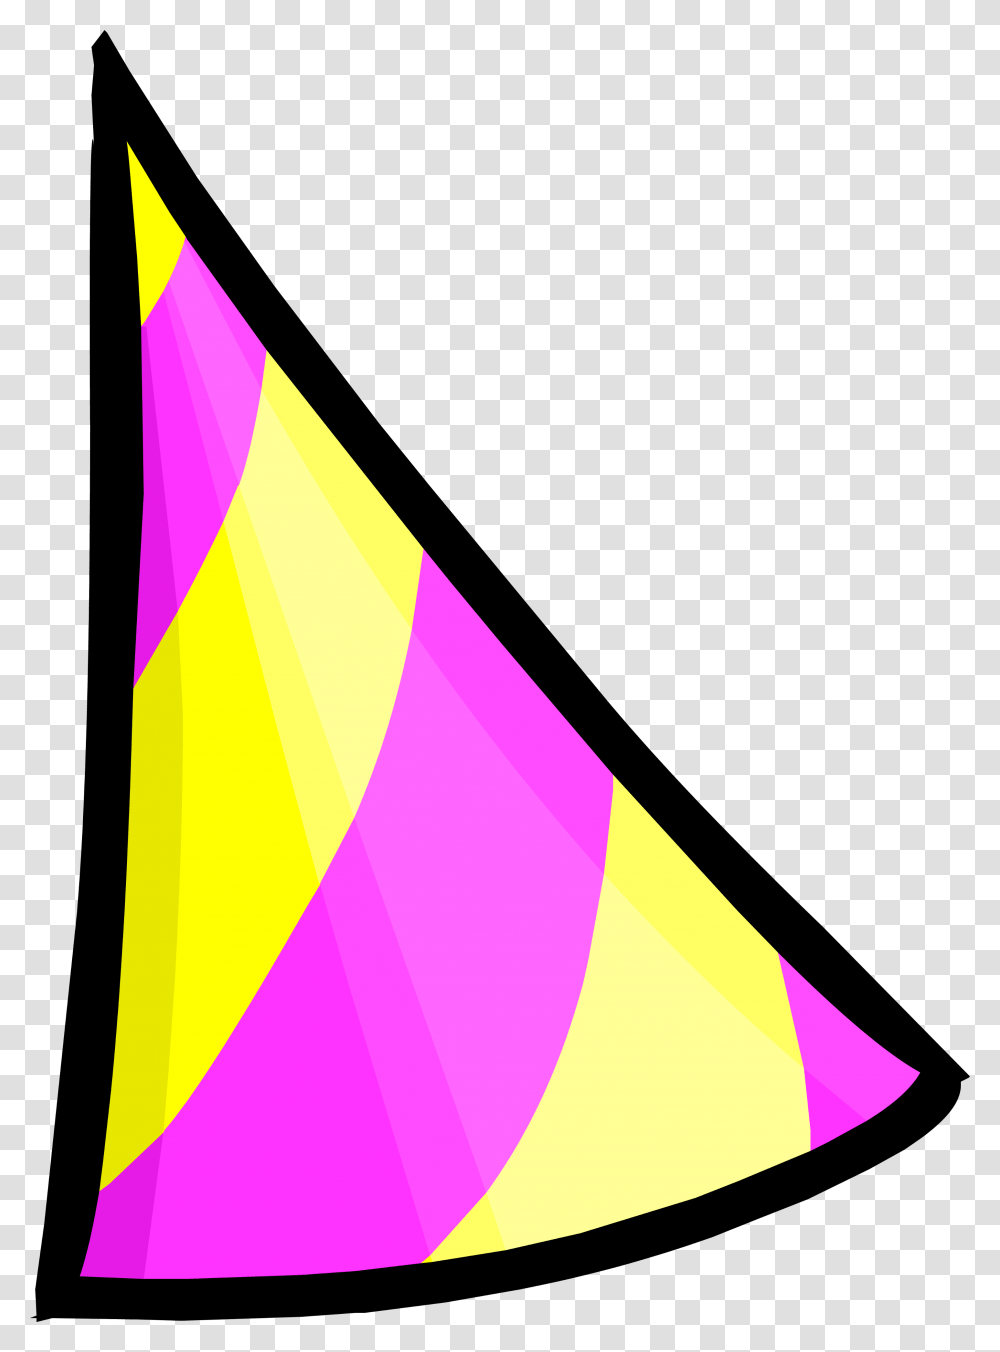 Triangle Clipart Item, Apparel, Party Hat, Cone Transparent Png